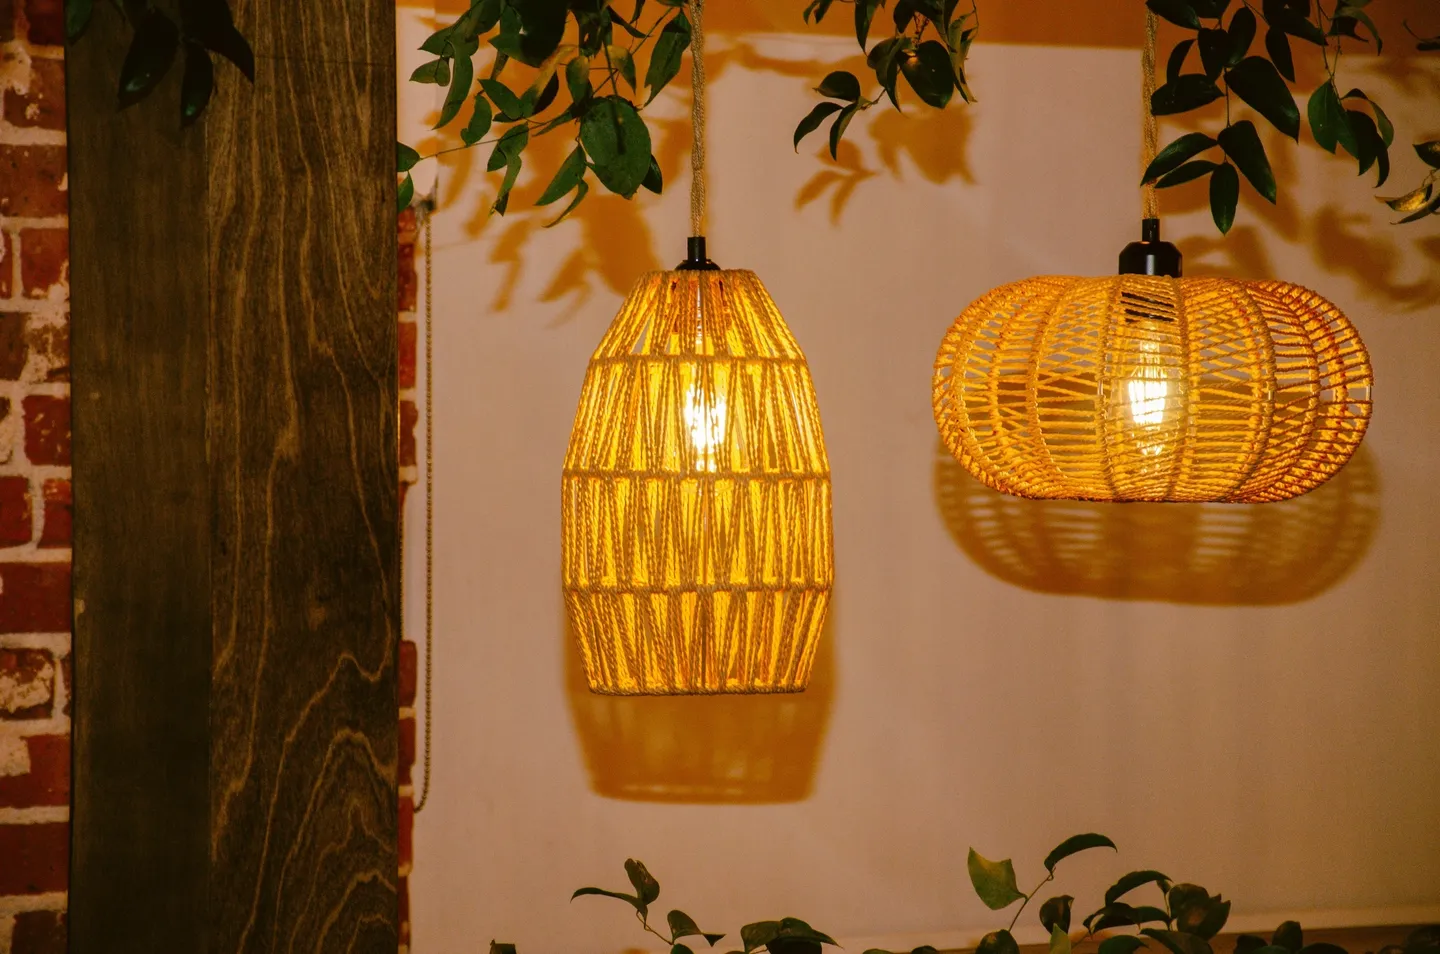 Two hanging wicker lamps casting warm light on a brick wall with plant decorations, setting an intimate ambiance for the event.